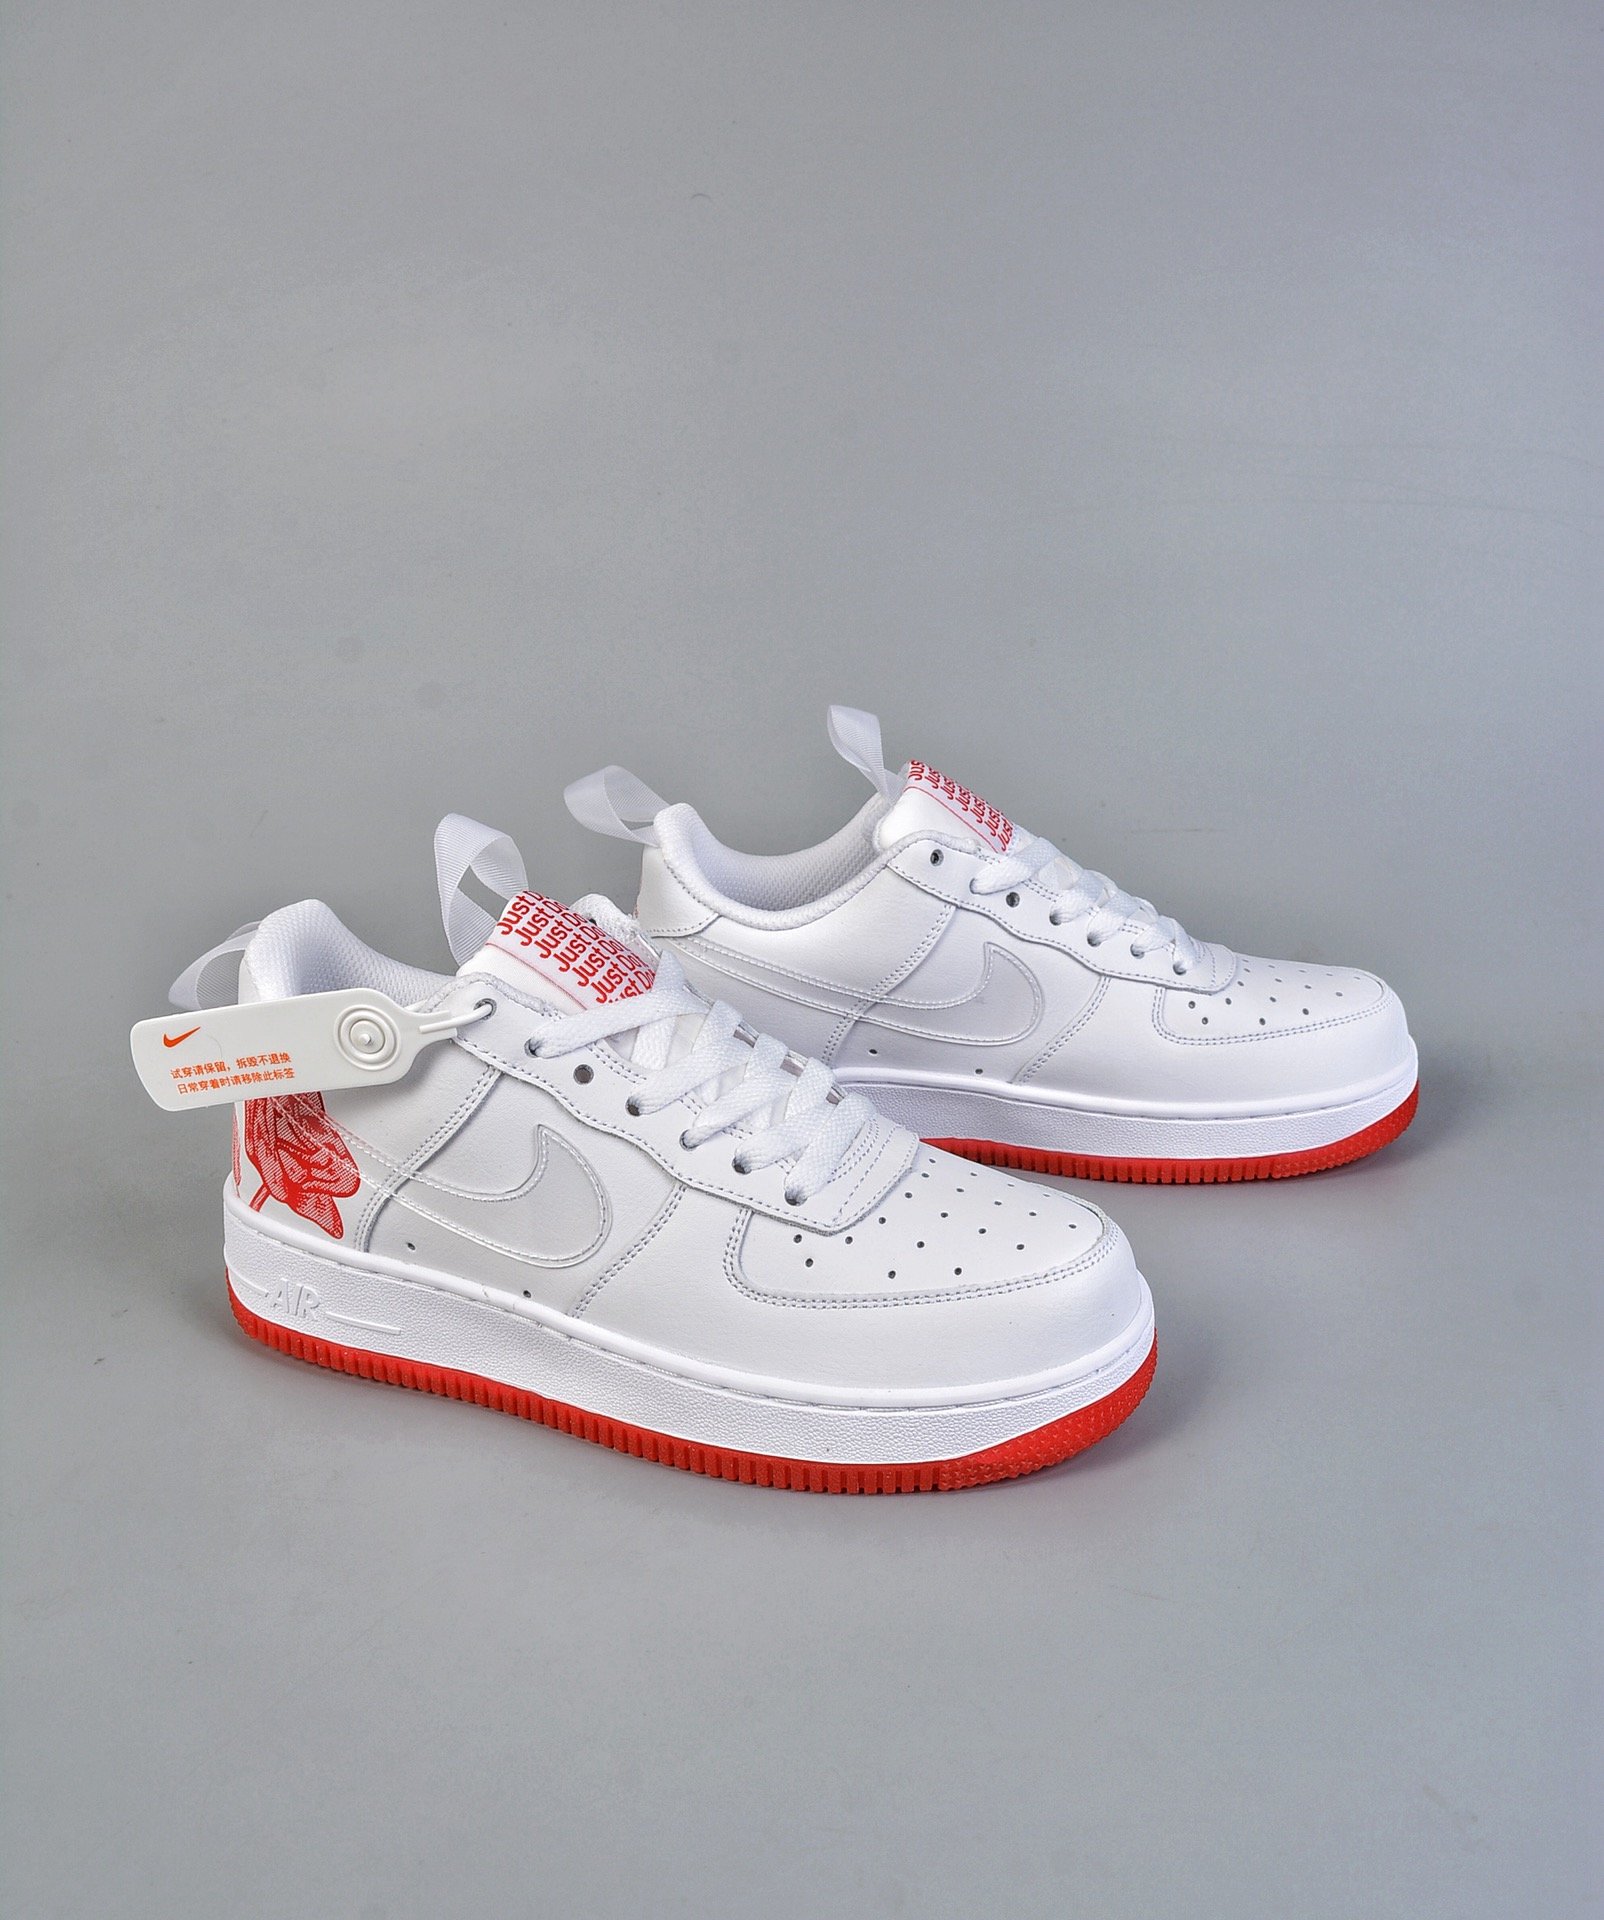 red rose air force ones